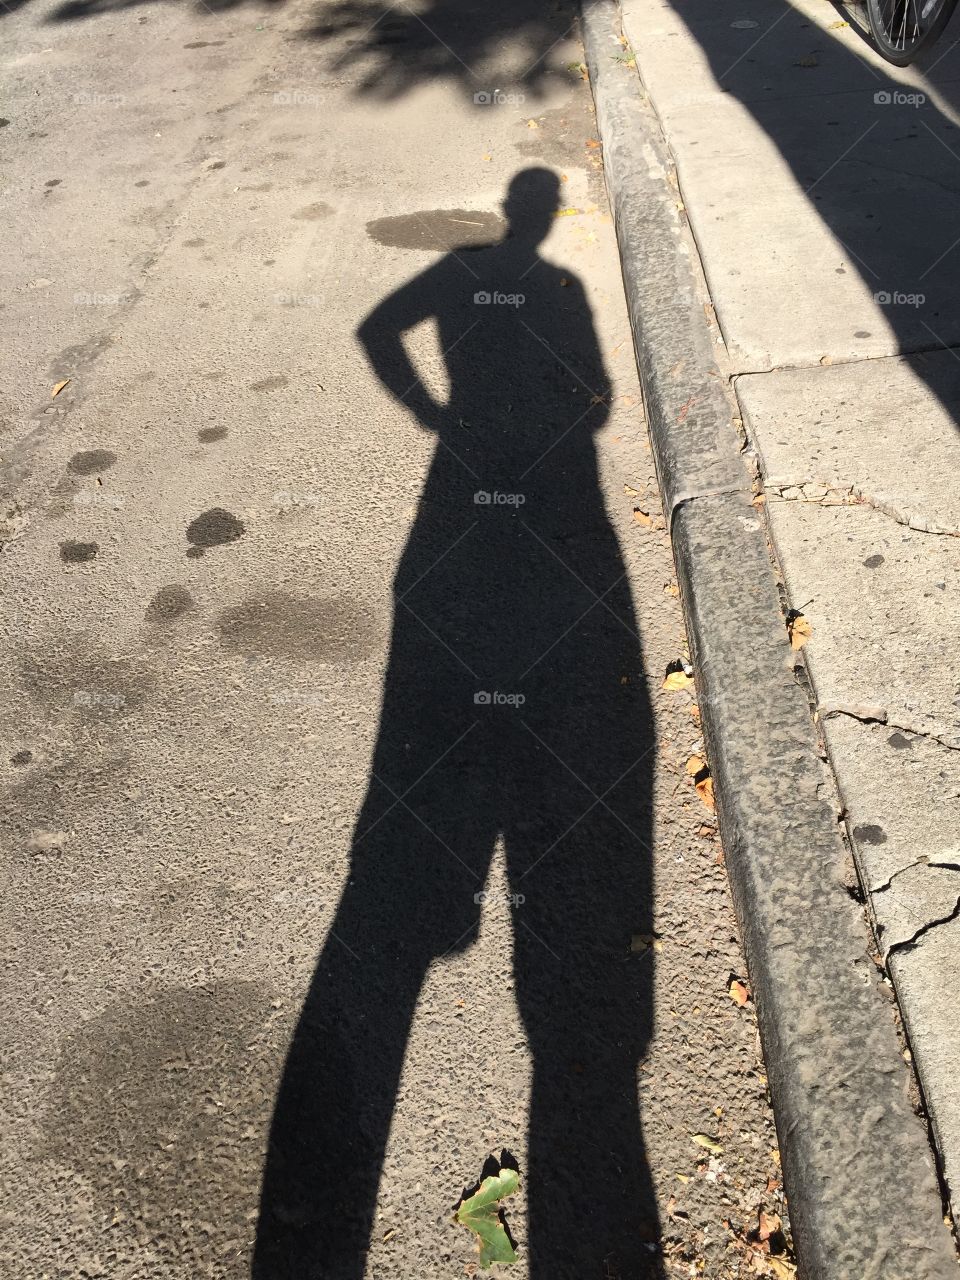 City Street Shadow. I was stretching my calf and realized my stance made me look like Peter Pan so I snapped a photo, as one does. 